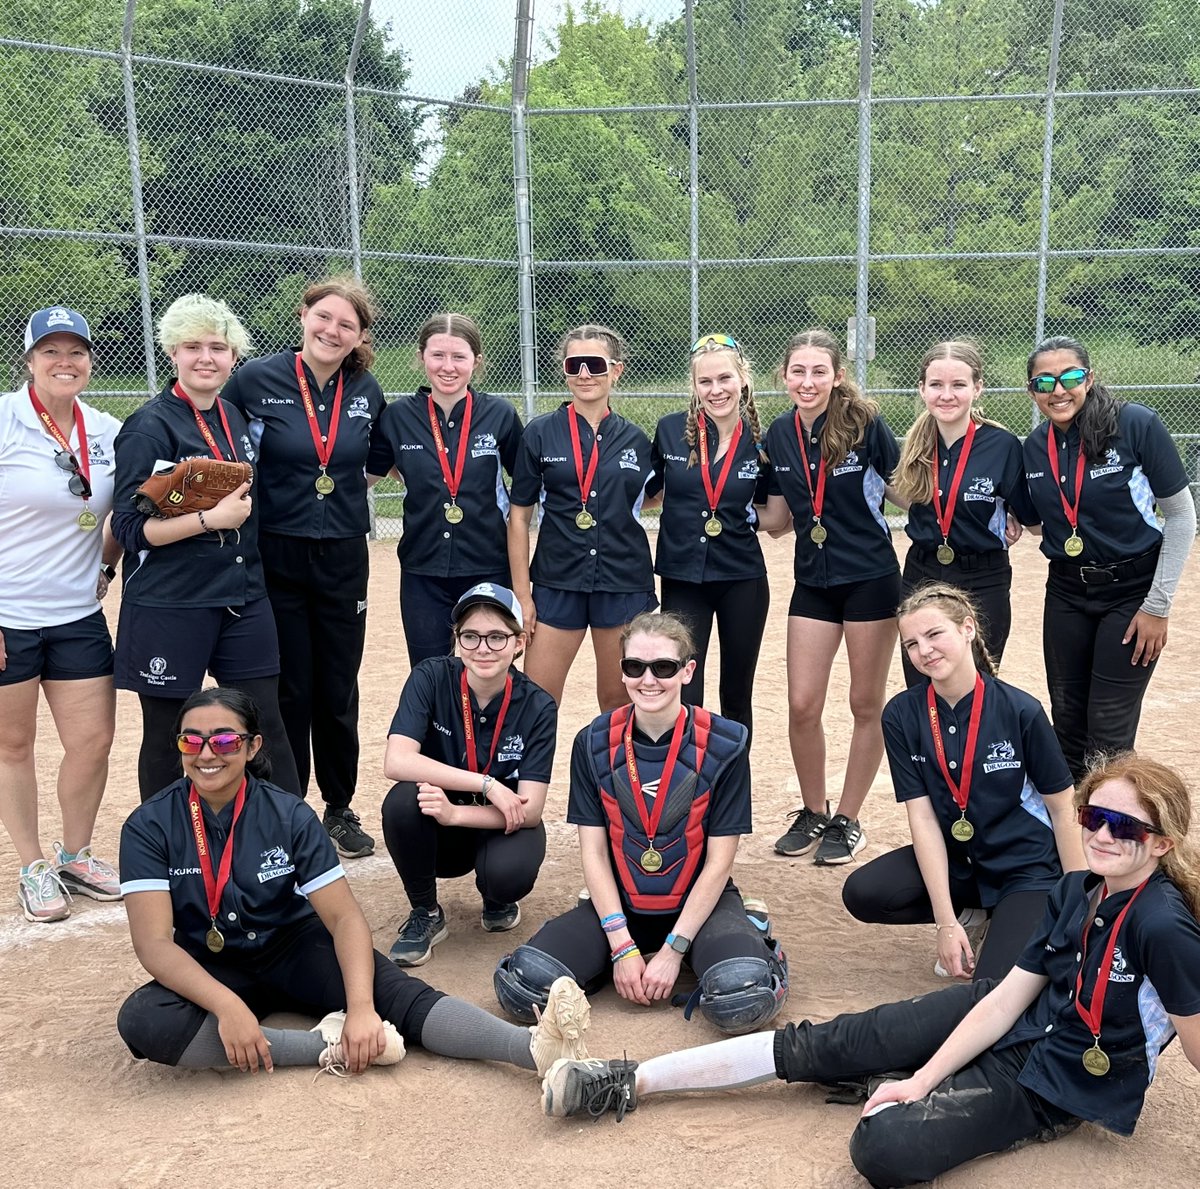 Champions! Congratulations to #trafalgarcastleschool's Softball team who took the win in yesterday's championships! What a way to end an exciting season! Go Dragons!

#nothingaTrafalgargirlcanthandle #schoolforgirls #boardingschool #athletics #softball @CISOntario @CAISboarding